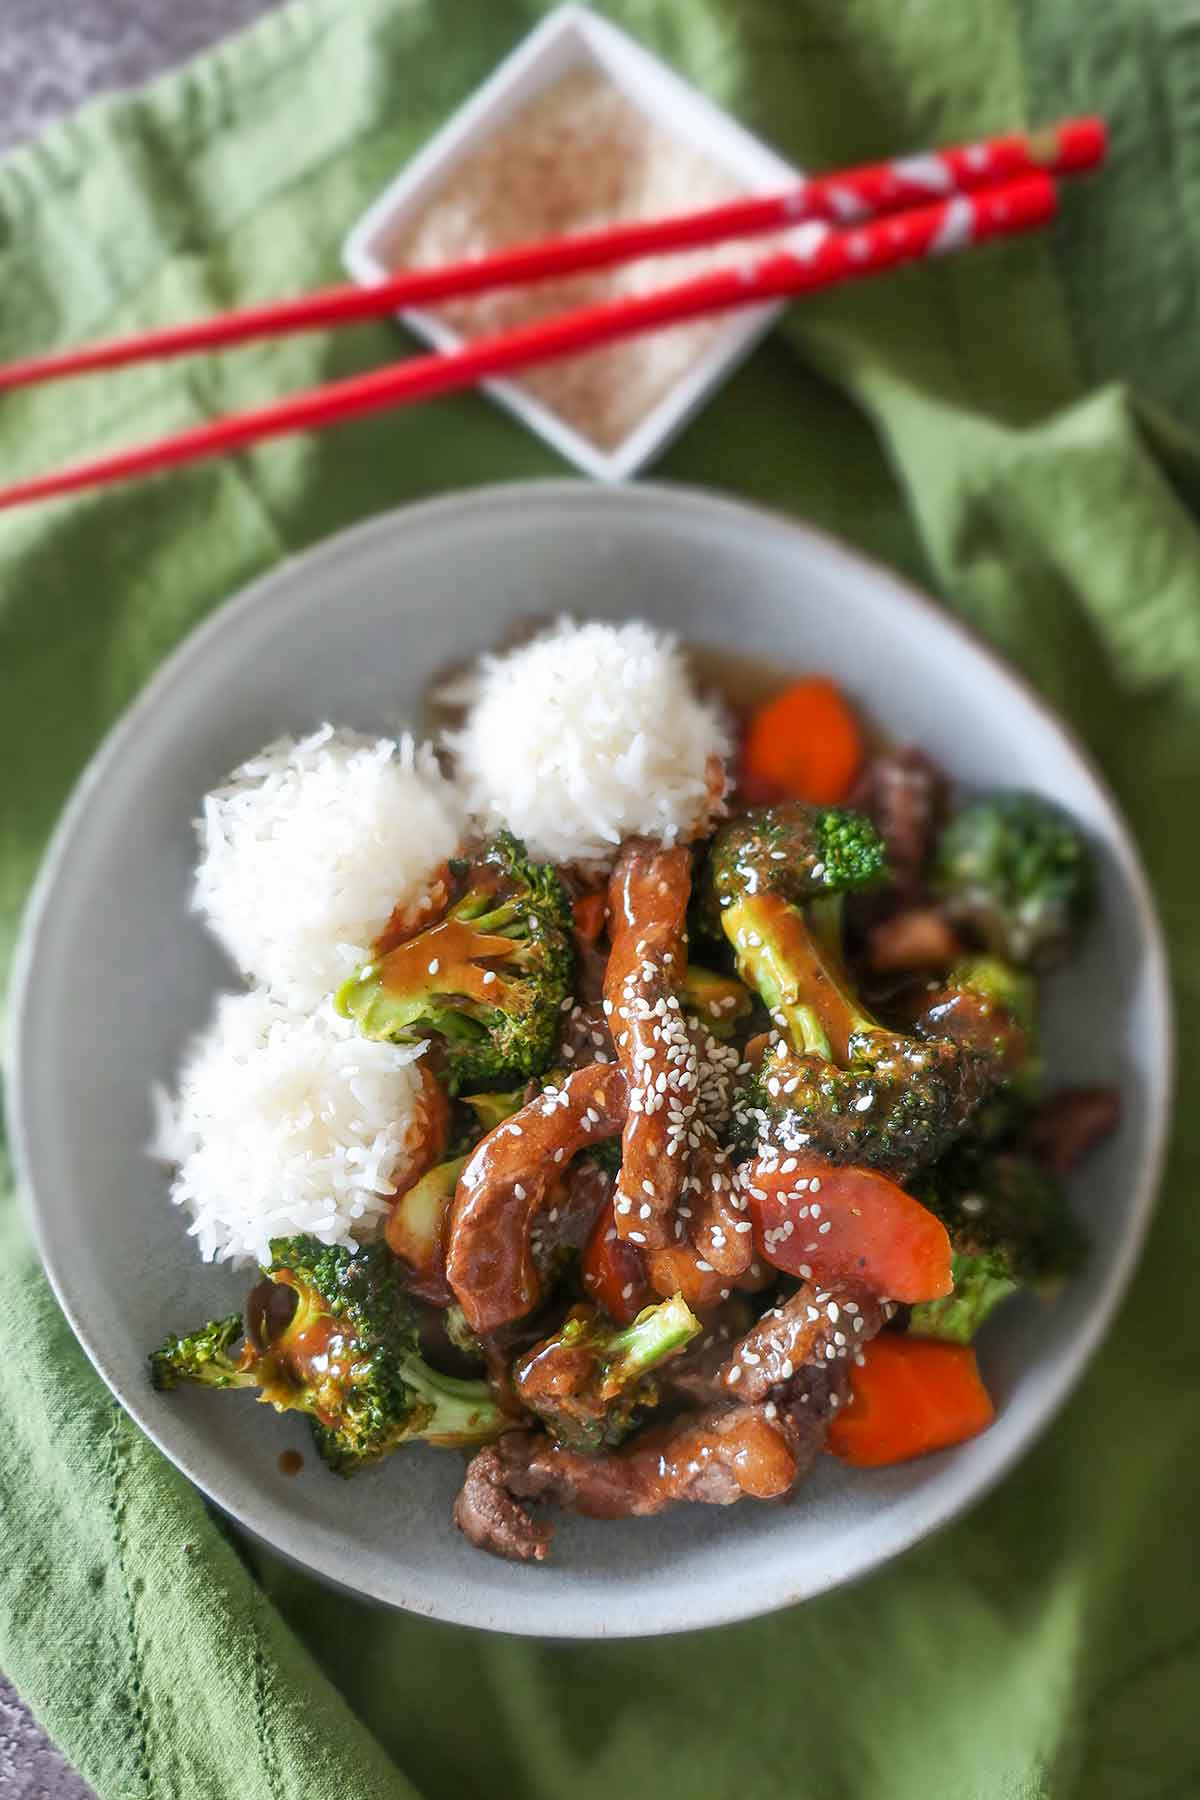 top view of Asian-style beef and broccoli with rice on a plate